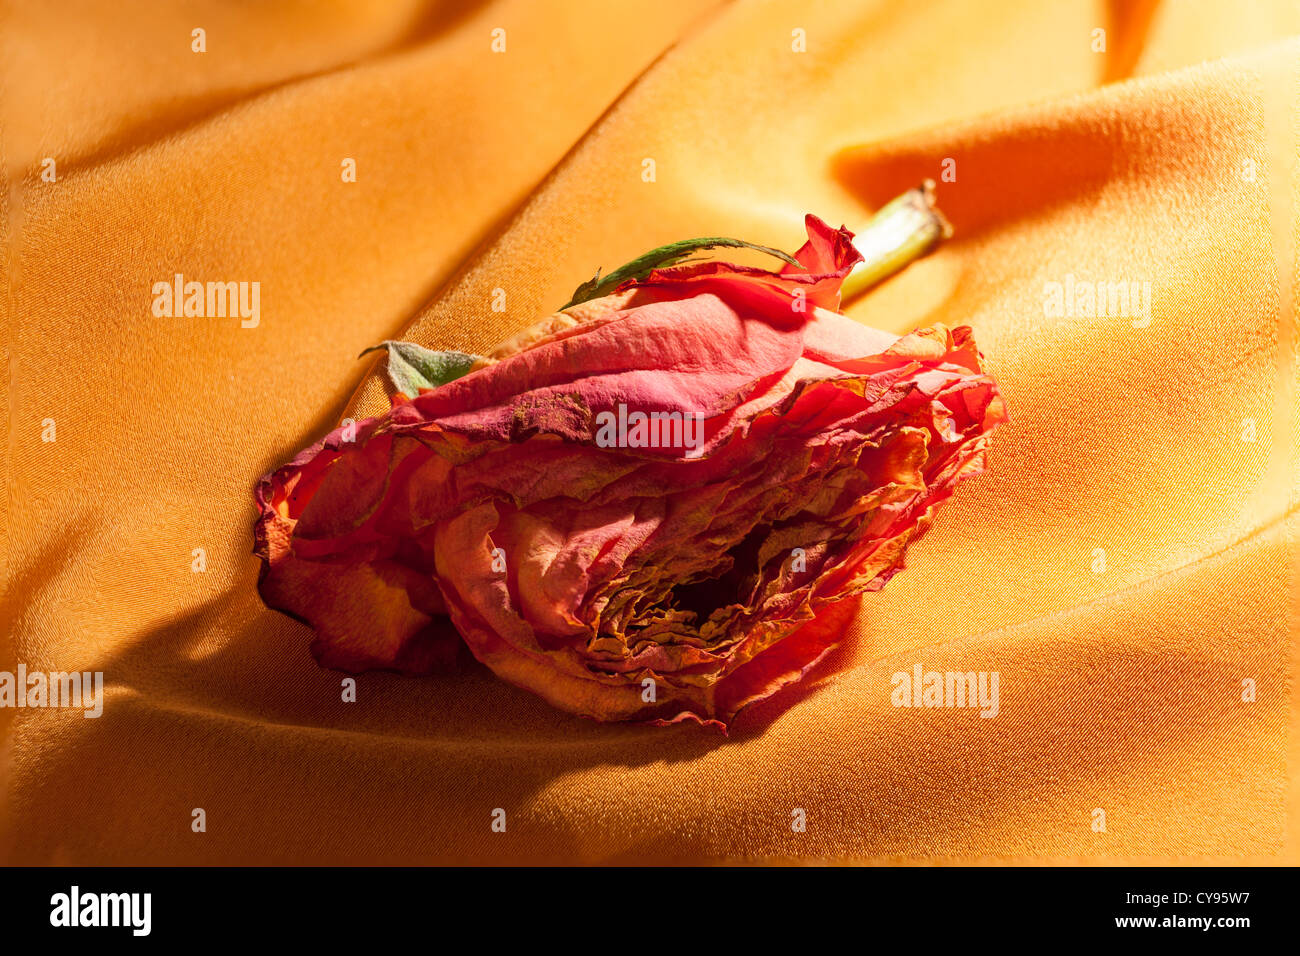 single wilted, dying pink hybrid tea rose on soft folds of material Stock Photo